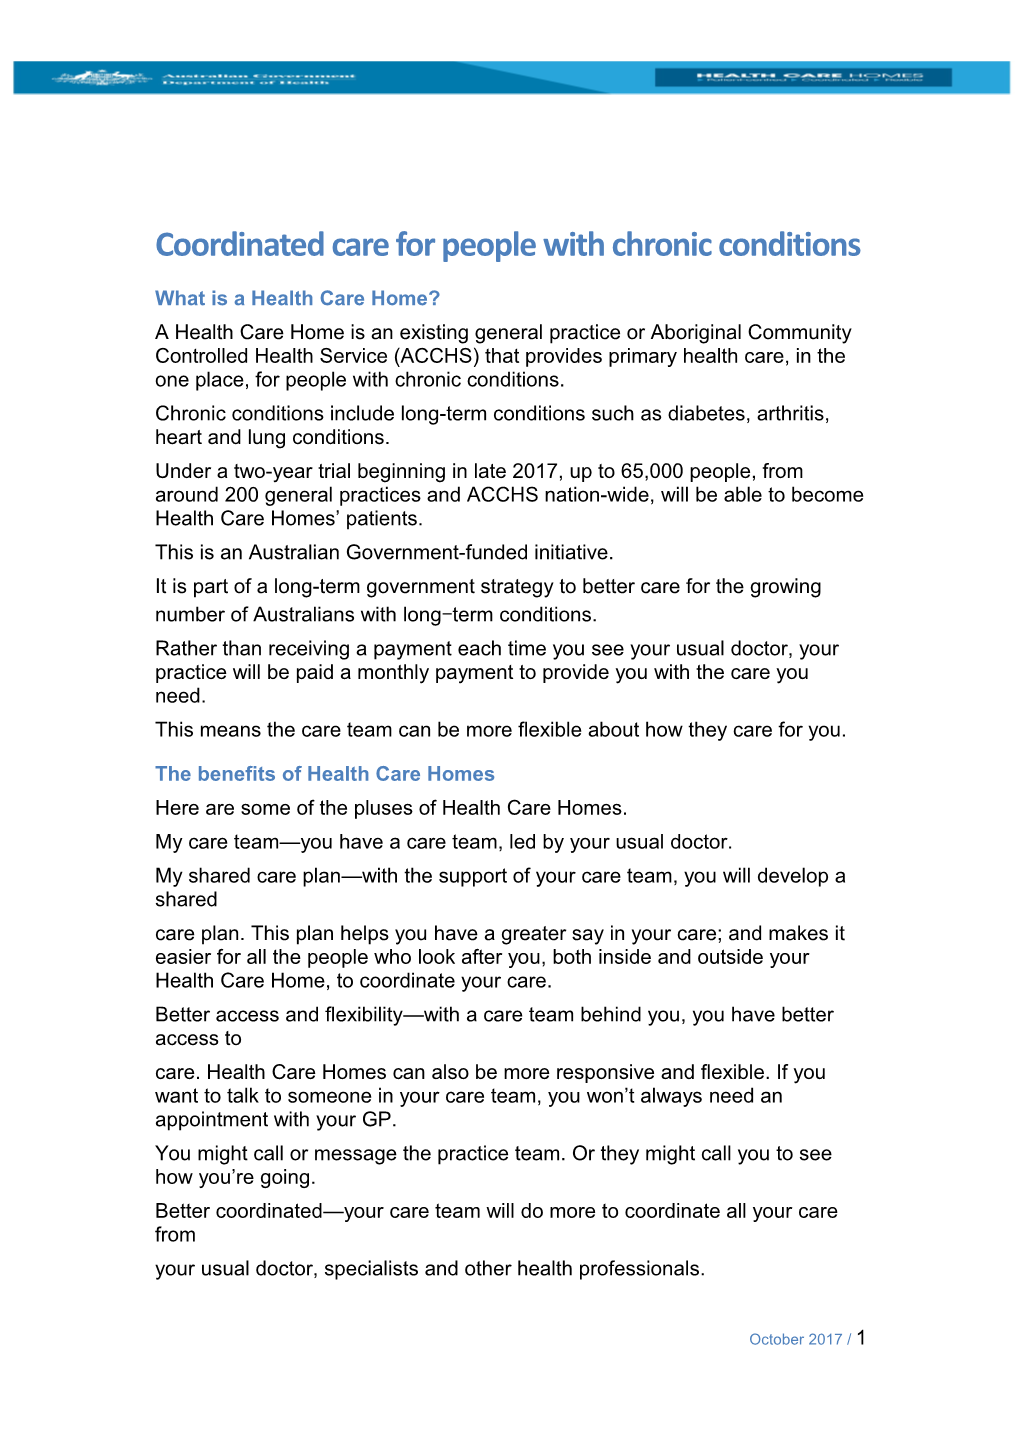 Factsheet: Coordinated Care for People with Chronic Conditions